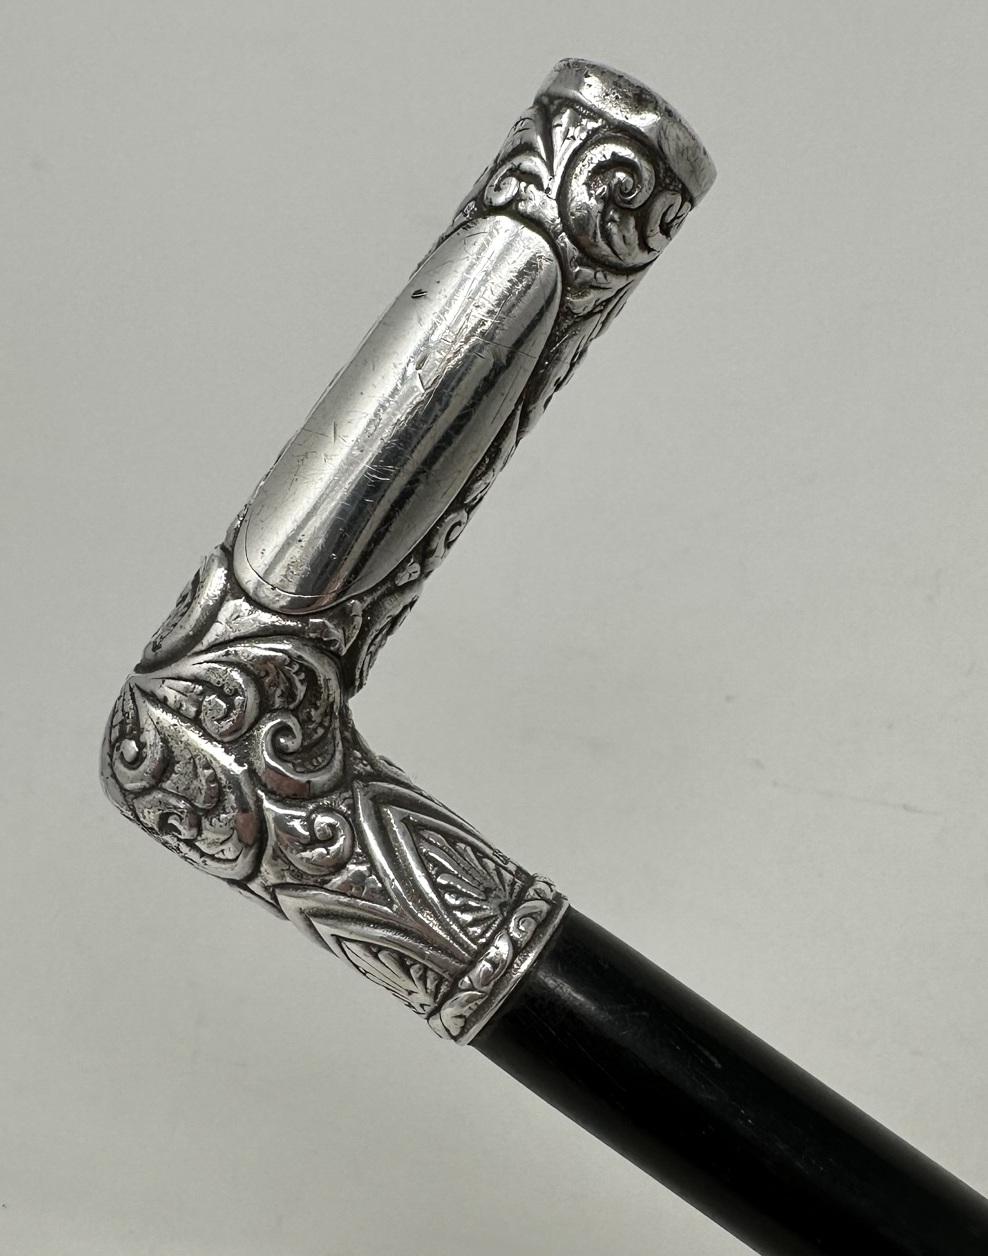 Carved Antique Vintage Lady's Gentleman's Walking Cane Swagger Stick Sterling Silver  